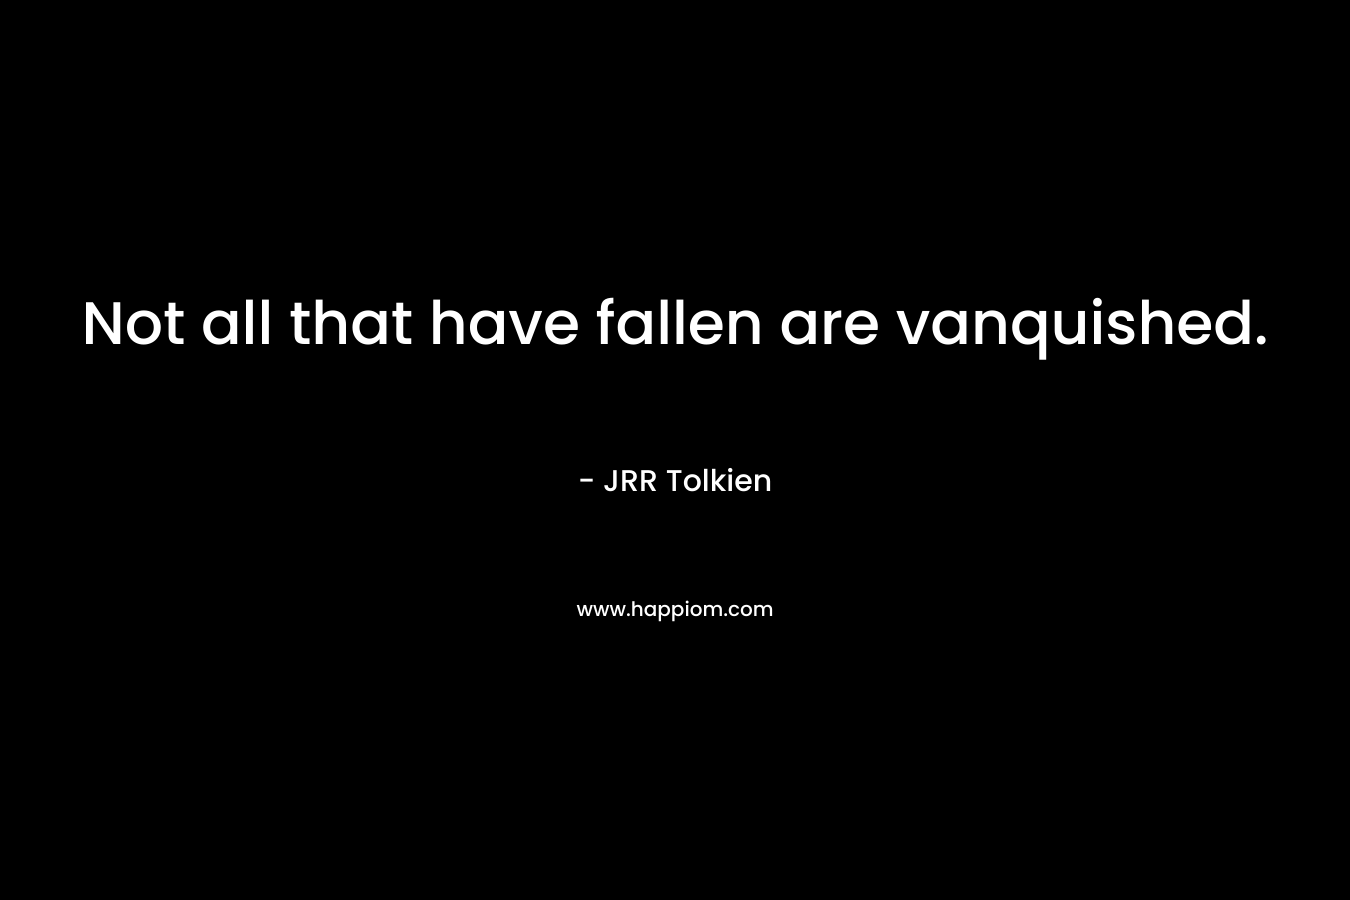 Not all that have fallen are vanquished.